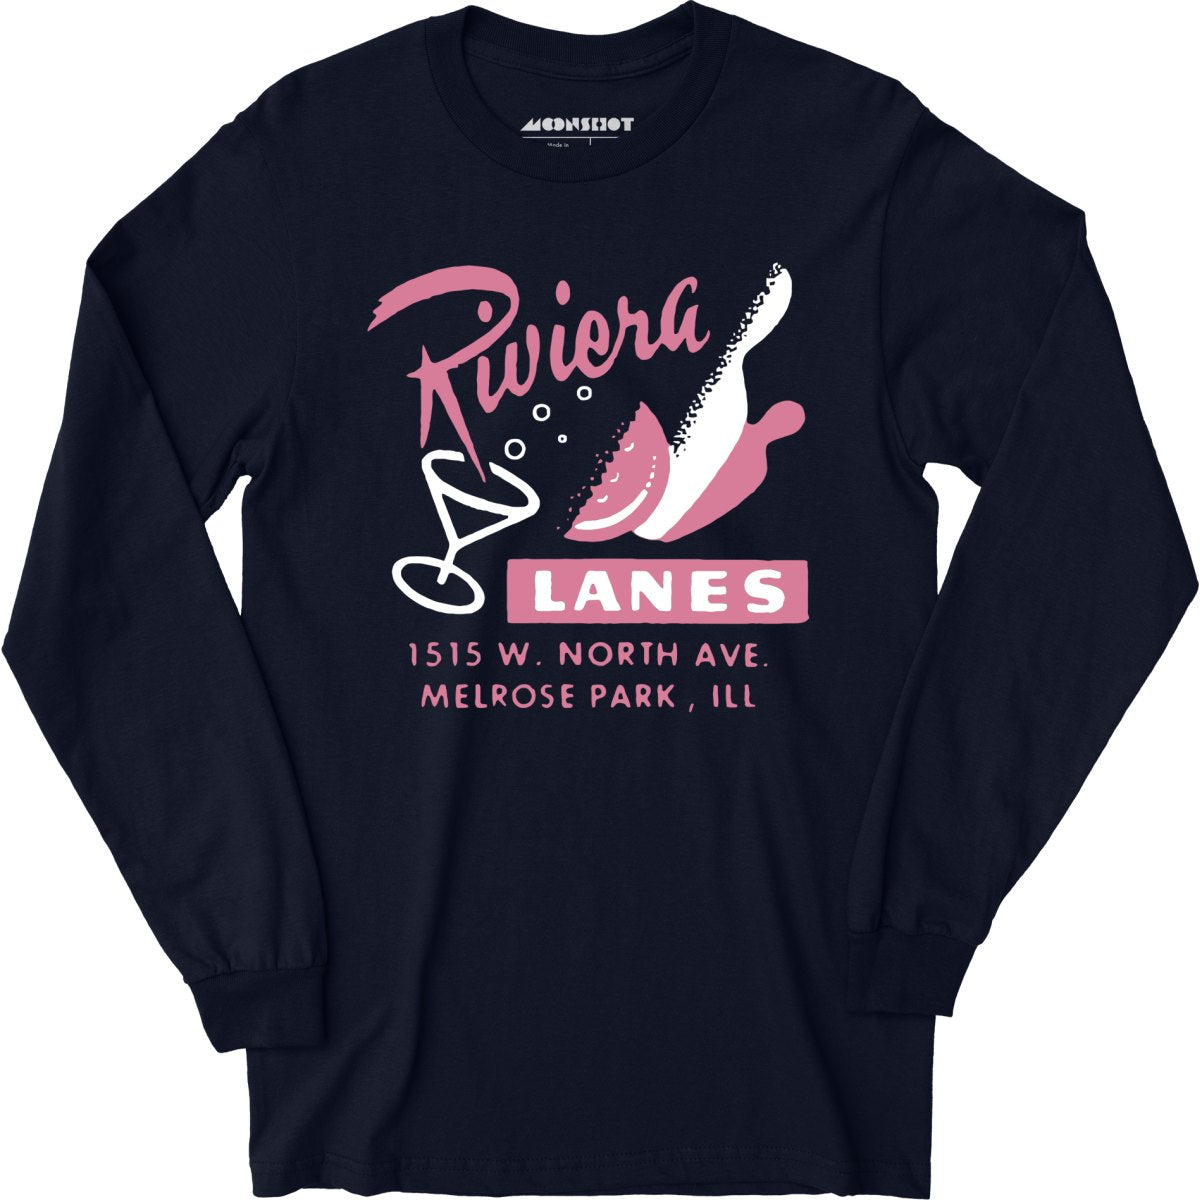 Riviera Lanes - Melrose Park, IL - Vintage Bowling Alley - Long Sleeve T-Shirt